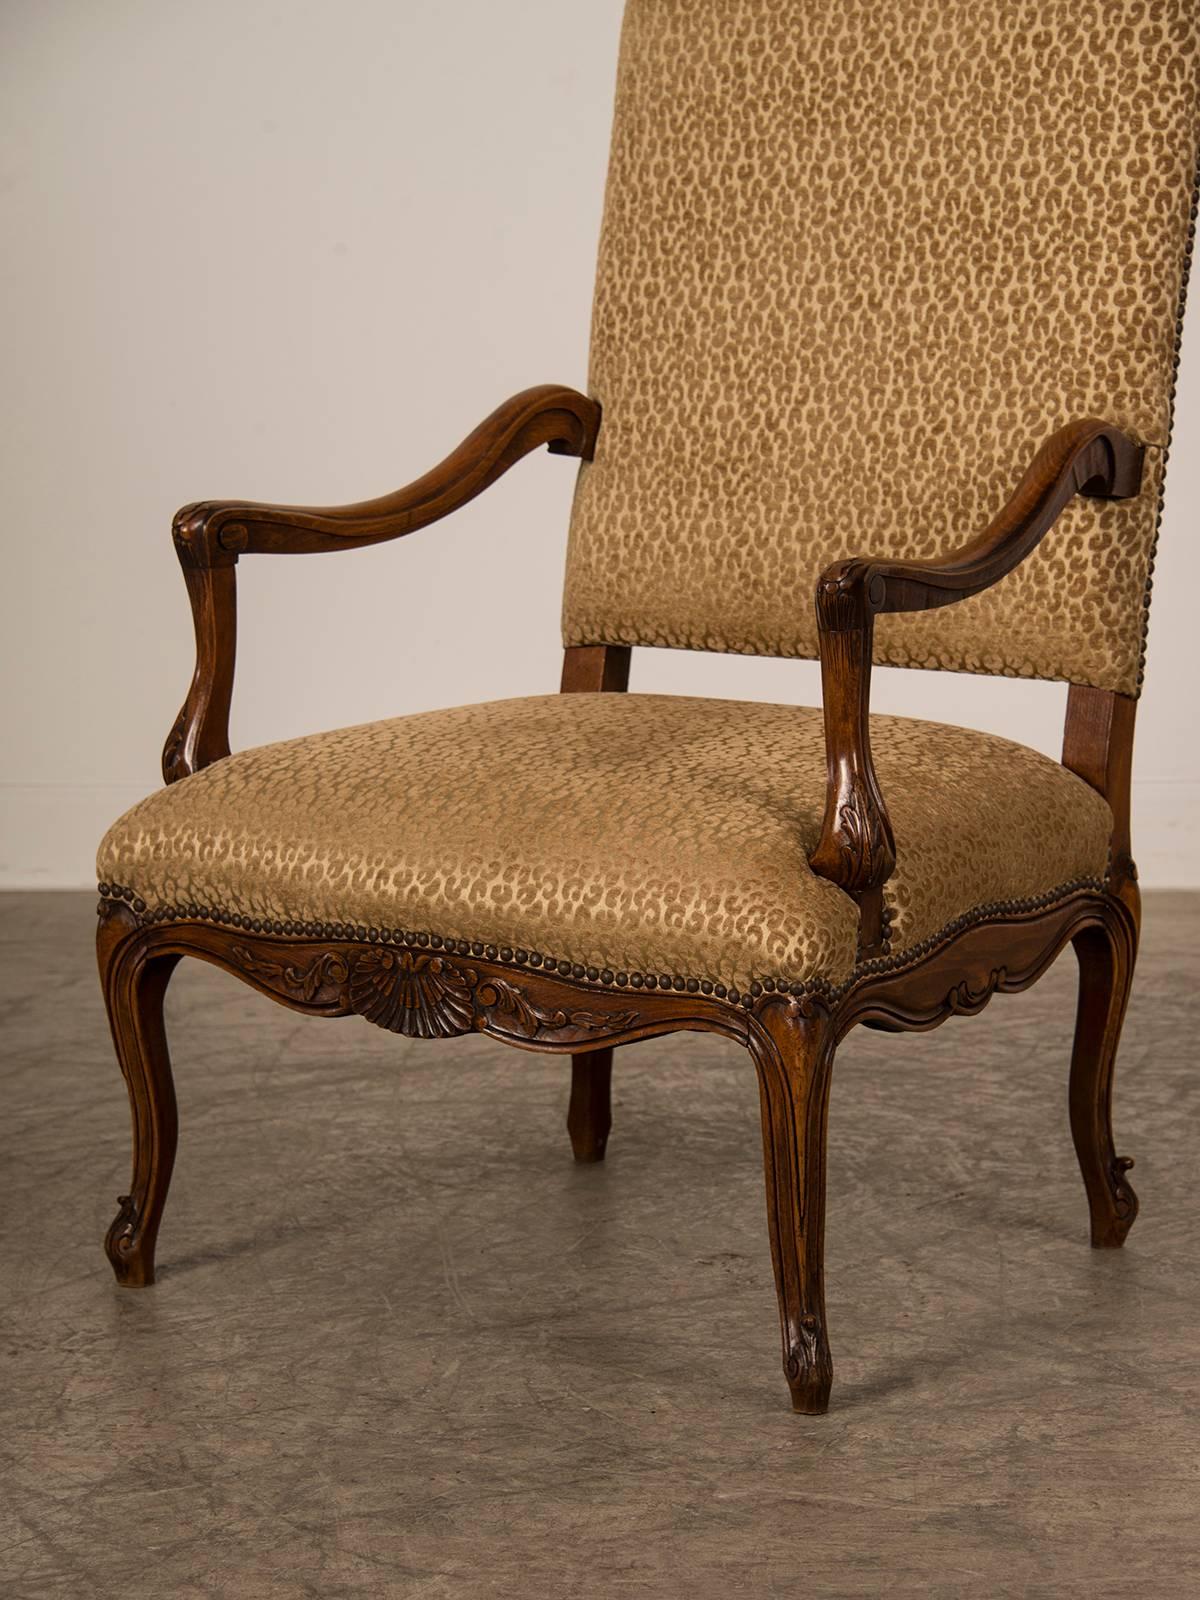 Antique French Louis XV Style Walnut Armchair ‘Fauteuil’, circa 1880 In Excellent Condition For Sale In Houston, TX